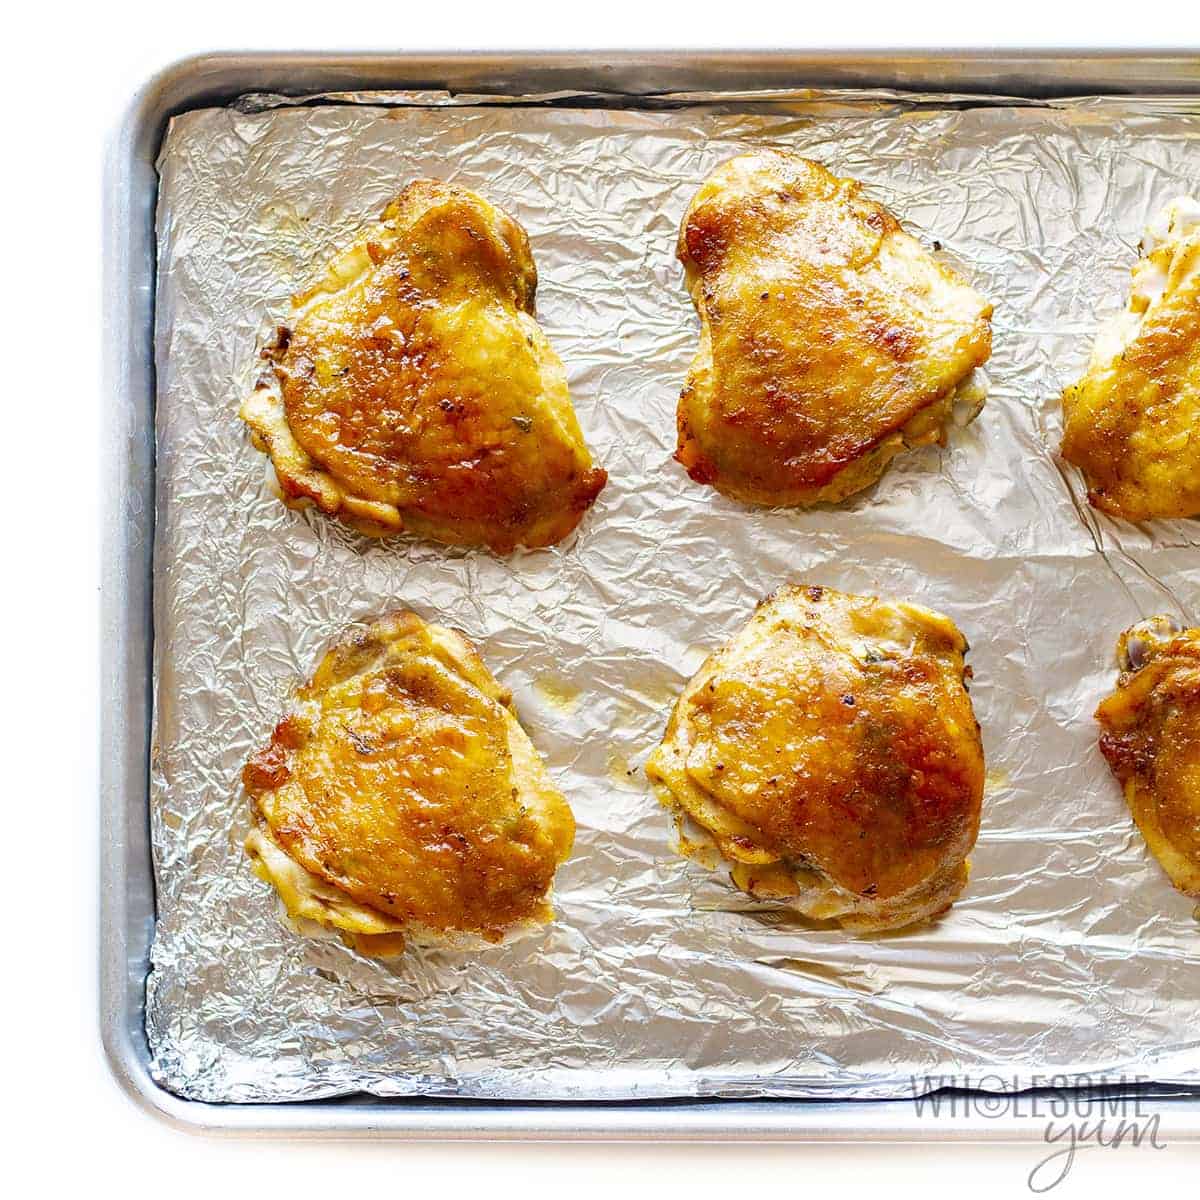 Baked bone-in chicken thighs on a sheet pan